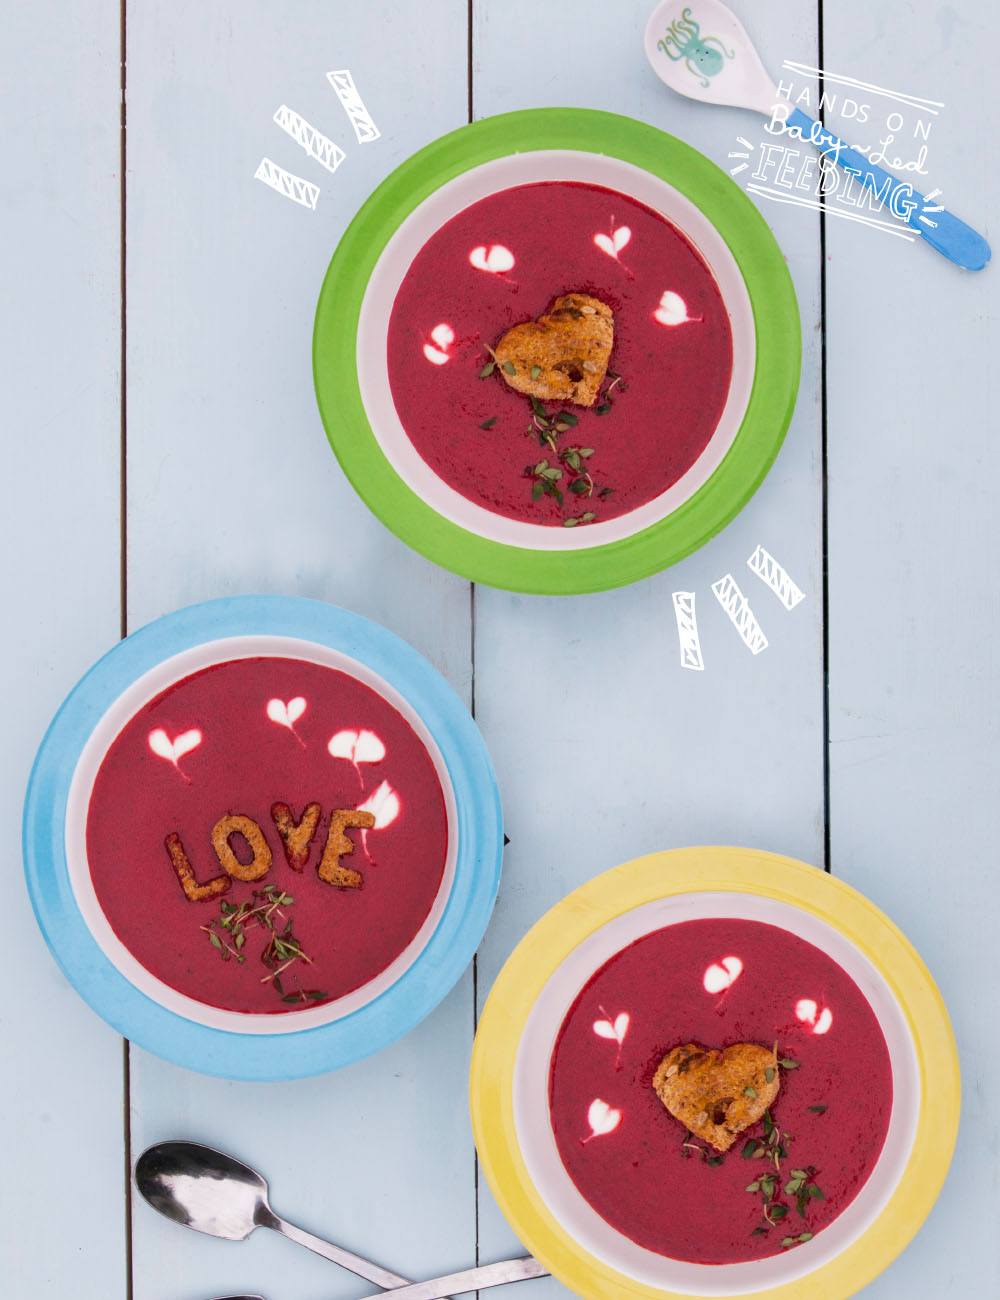 Easy and healthy beetroot and ginger soup for baby led weaning, toddlers, and parents alike. Made with colorful beetroot, flavorful fresh ginger, onion, hearty broccoli, nutty coconut milk, served with fresh yogurt and thyme. #beetroot #soup #souprecipe #valentinesdayideas #valentines #babyledweaning #babyledfeeding #soupinspiration 